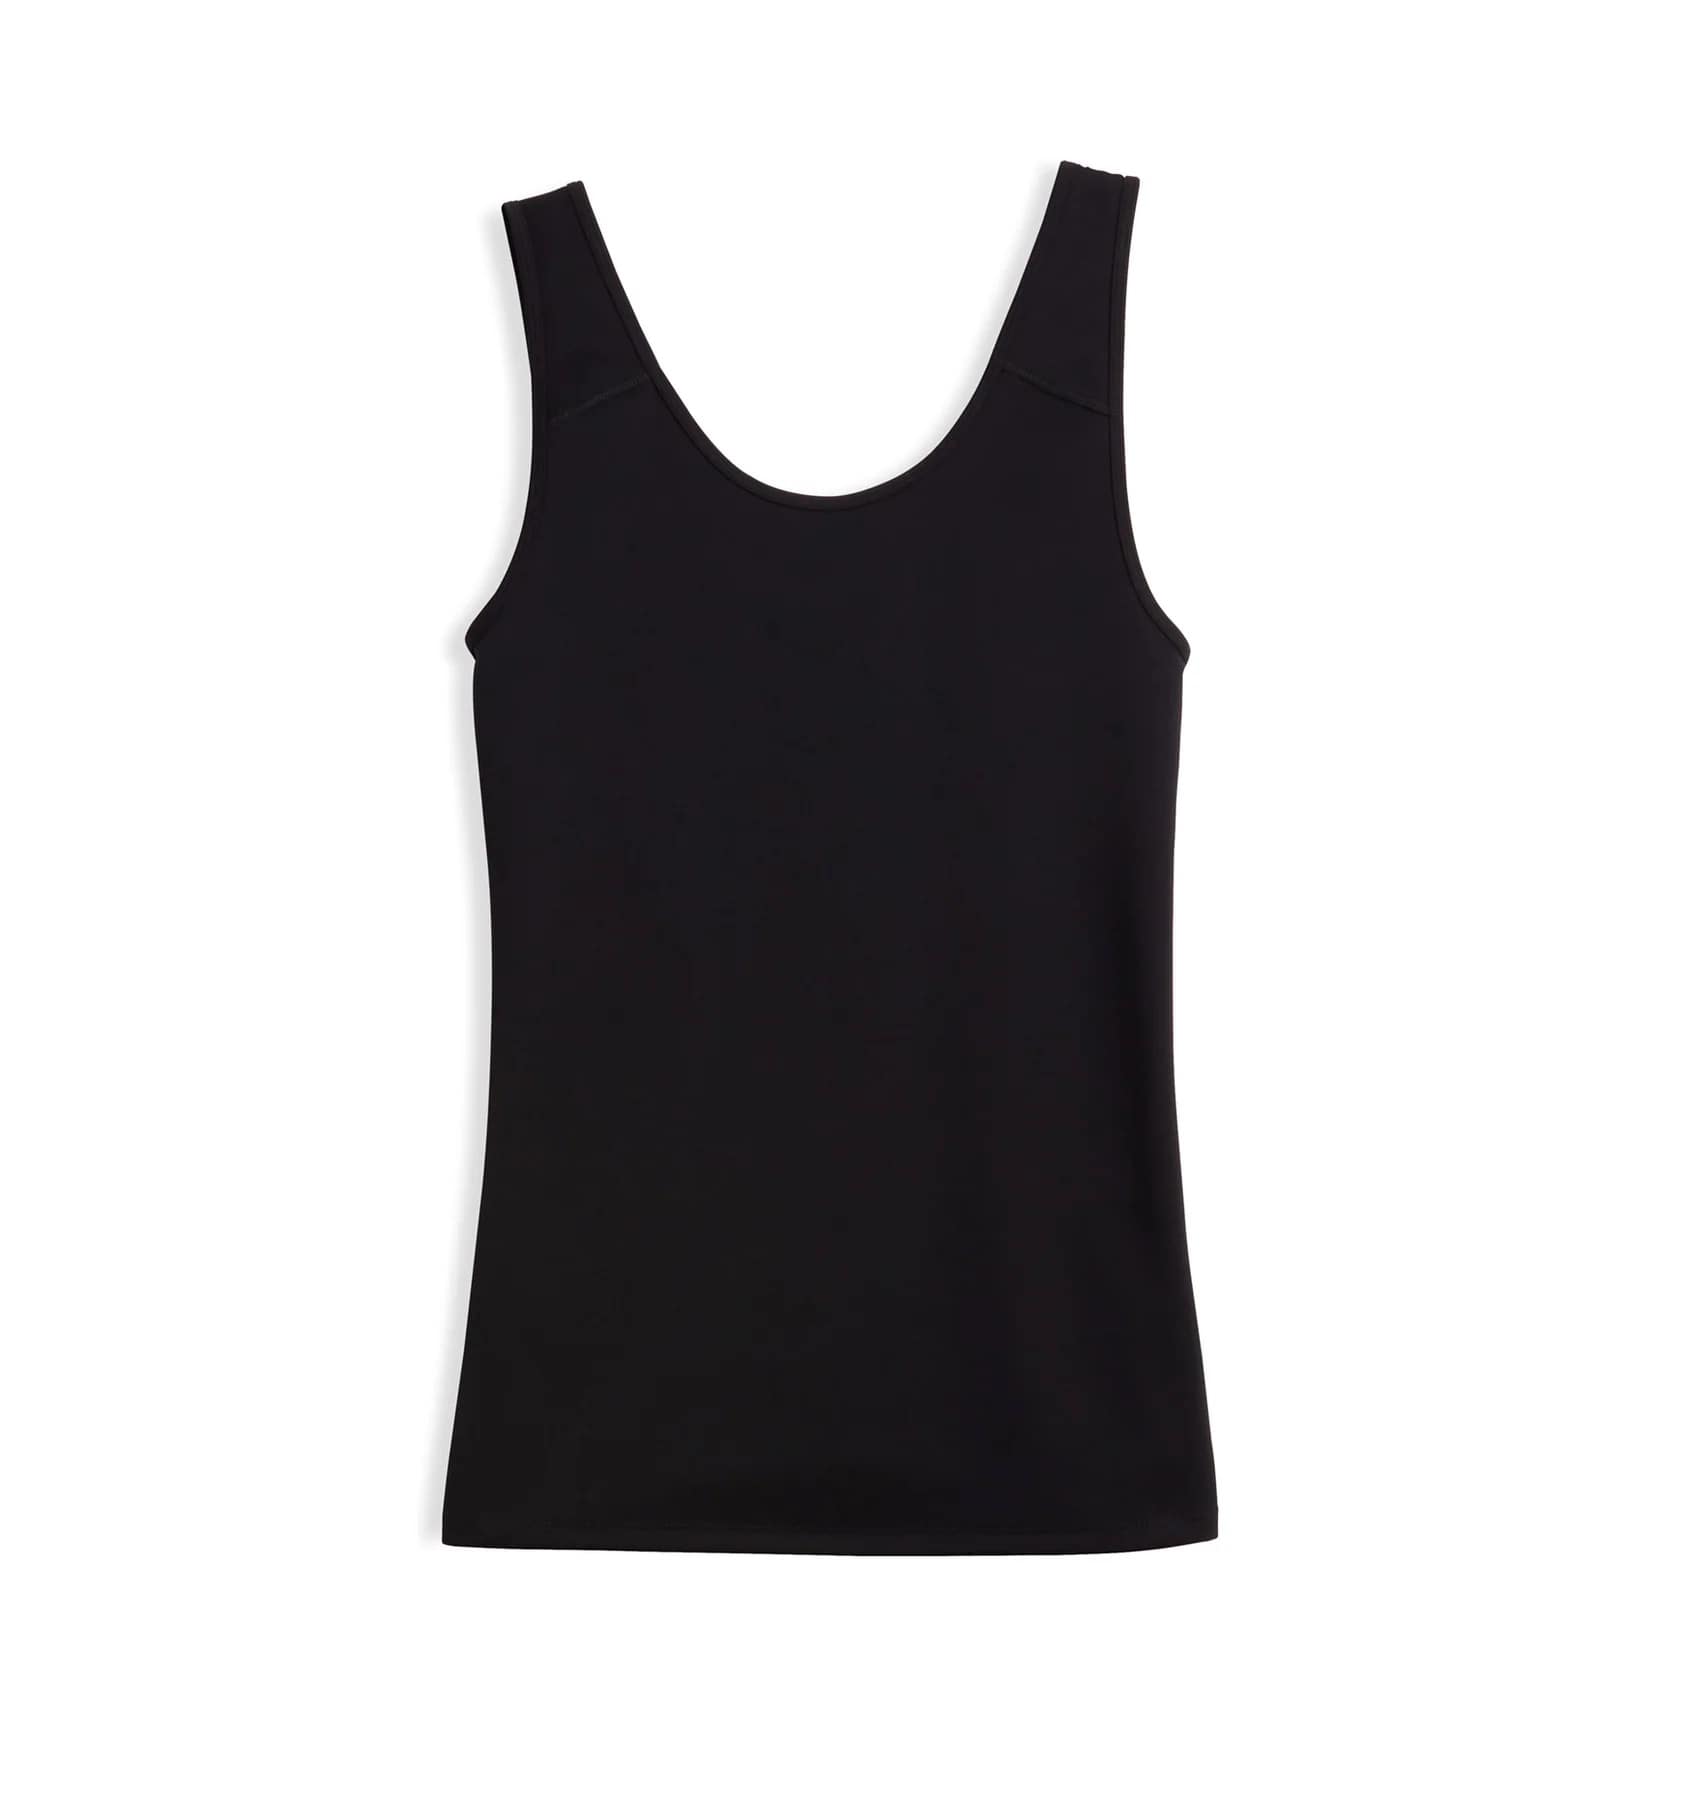 TomboyX Compression Tank